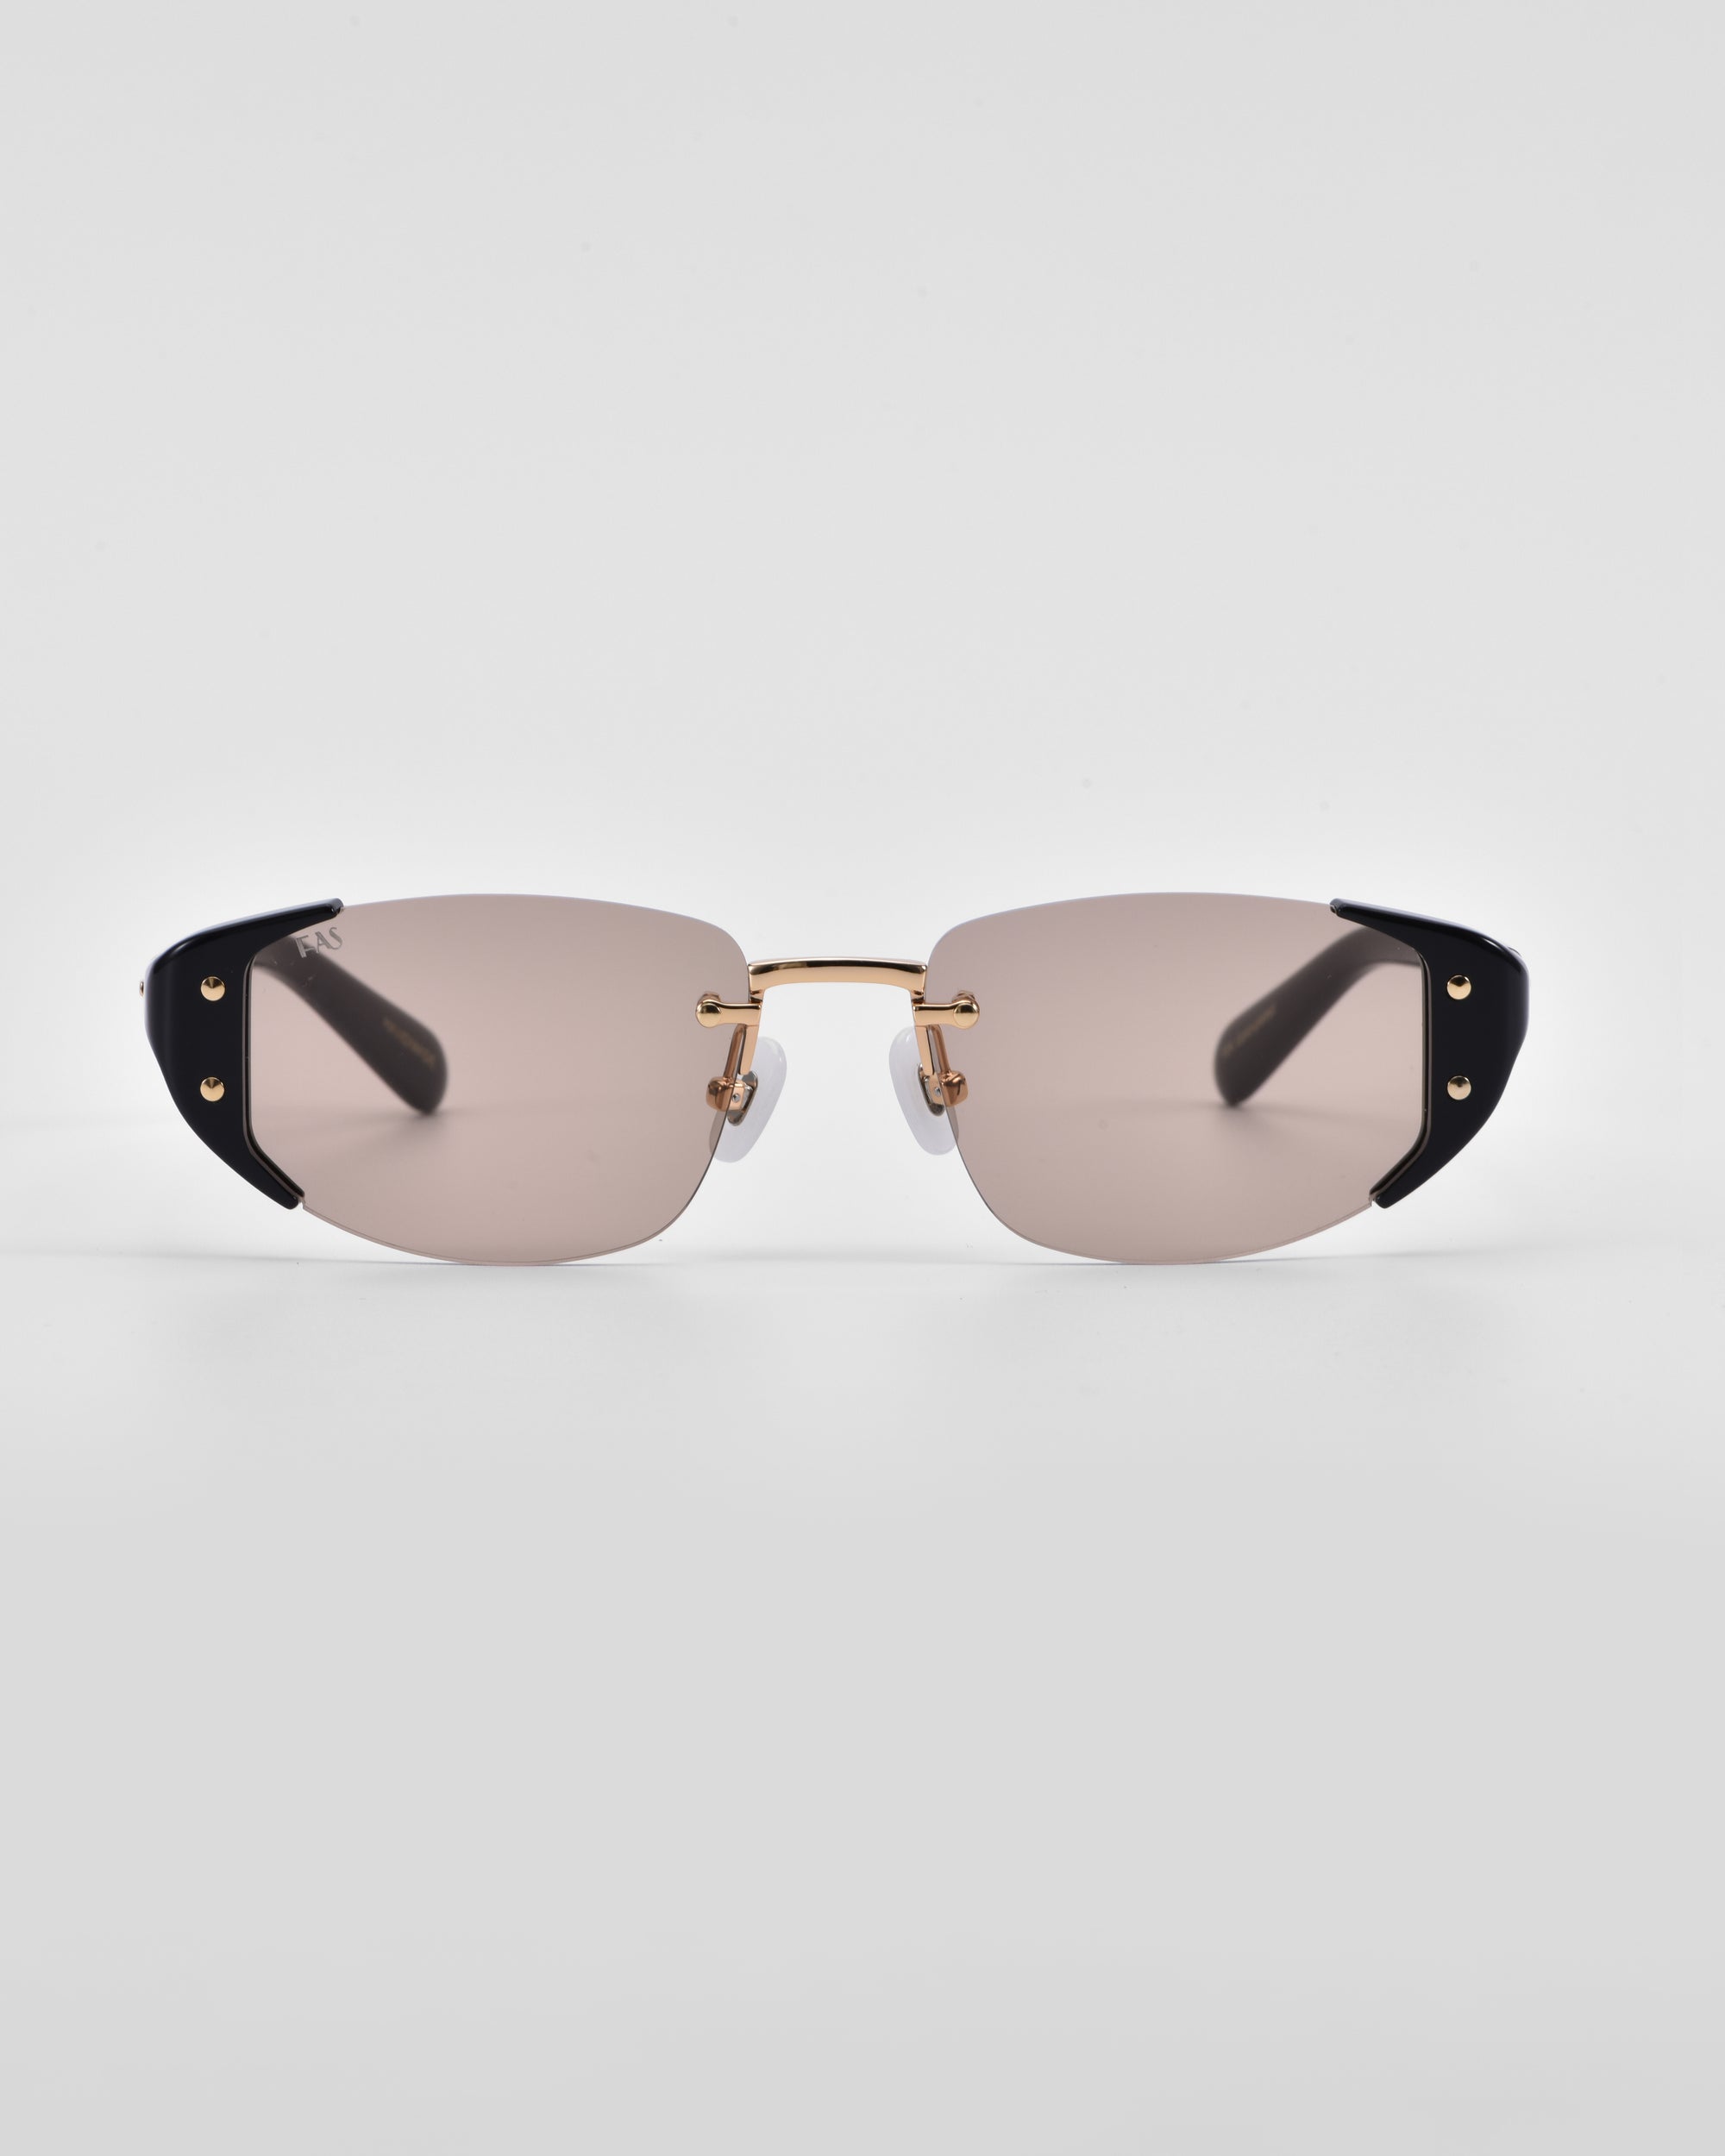 A pair of sleek For Art's Sake® Harbour sunglasses featuring rectangular, tinted lenses, gold metal frames, and black accents on the corners. The retro-inspired design is complemented by jade-stone nose pads, making them both minimalist and modern against a plain white background.